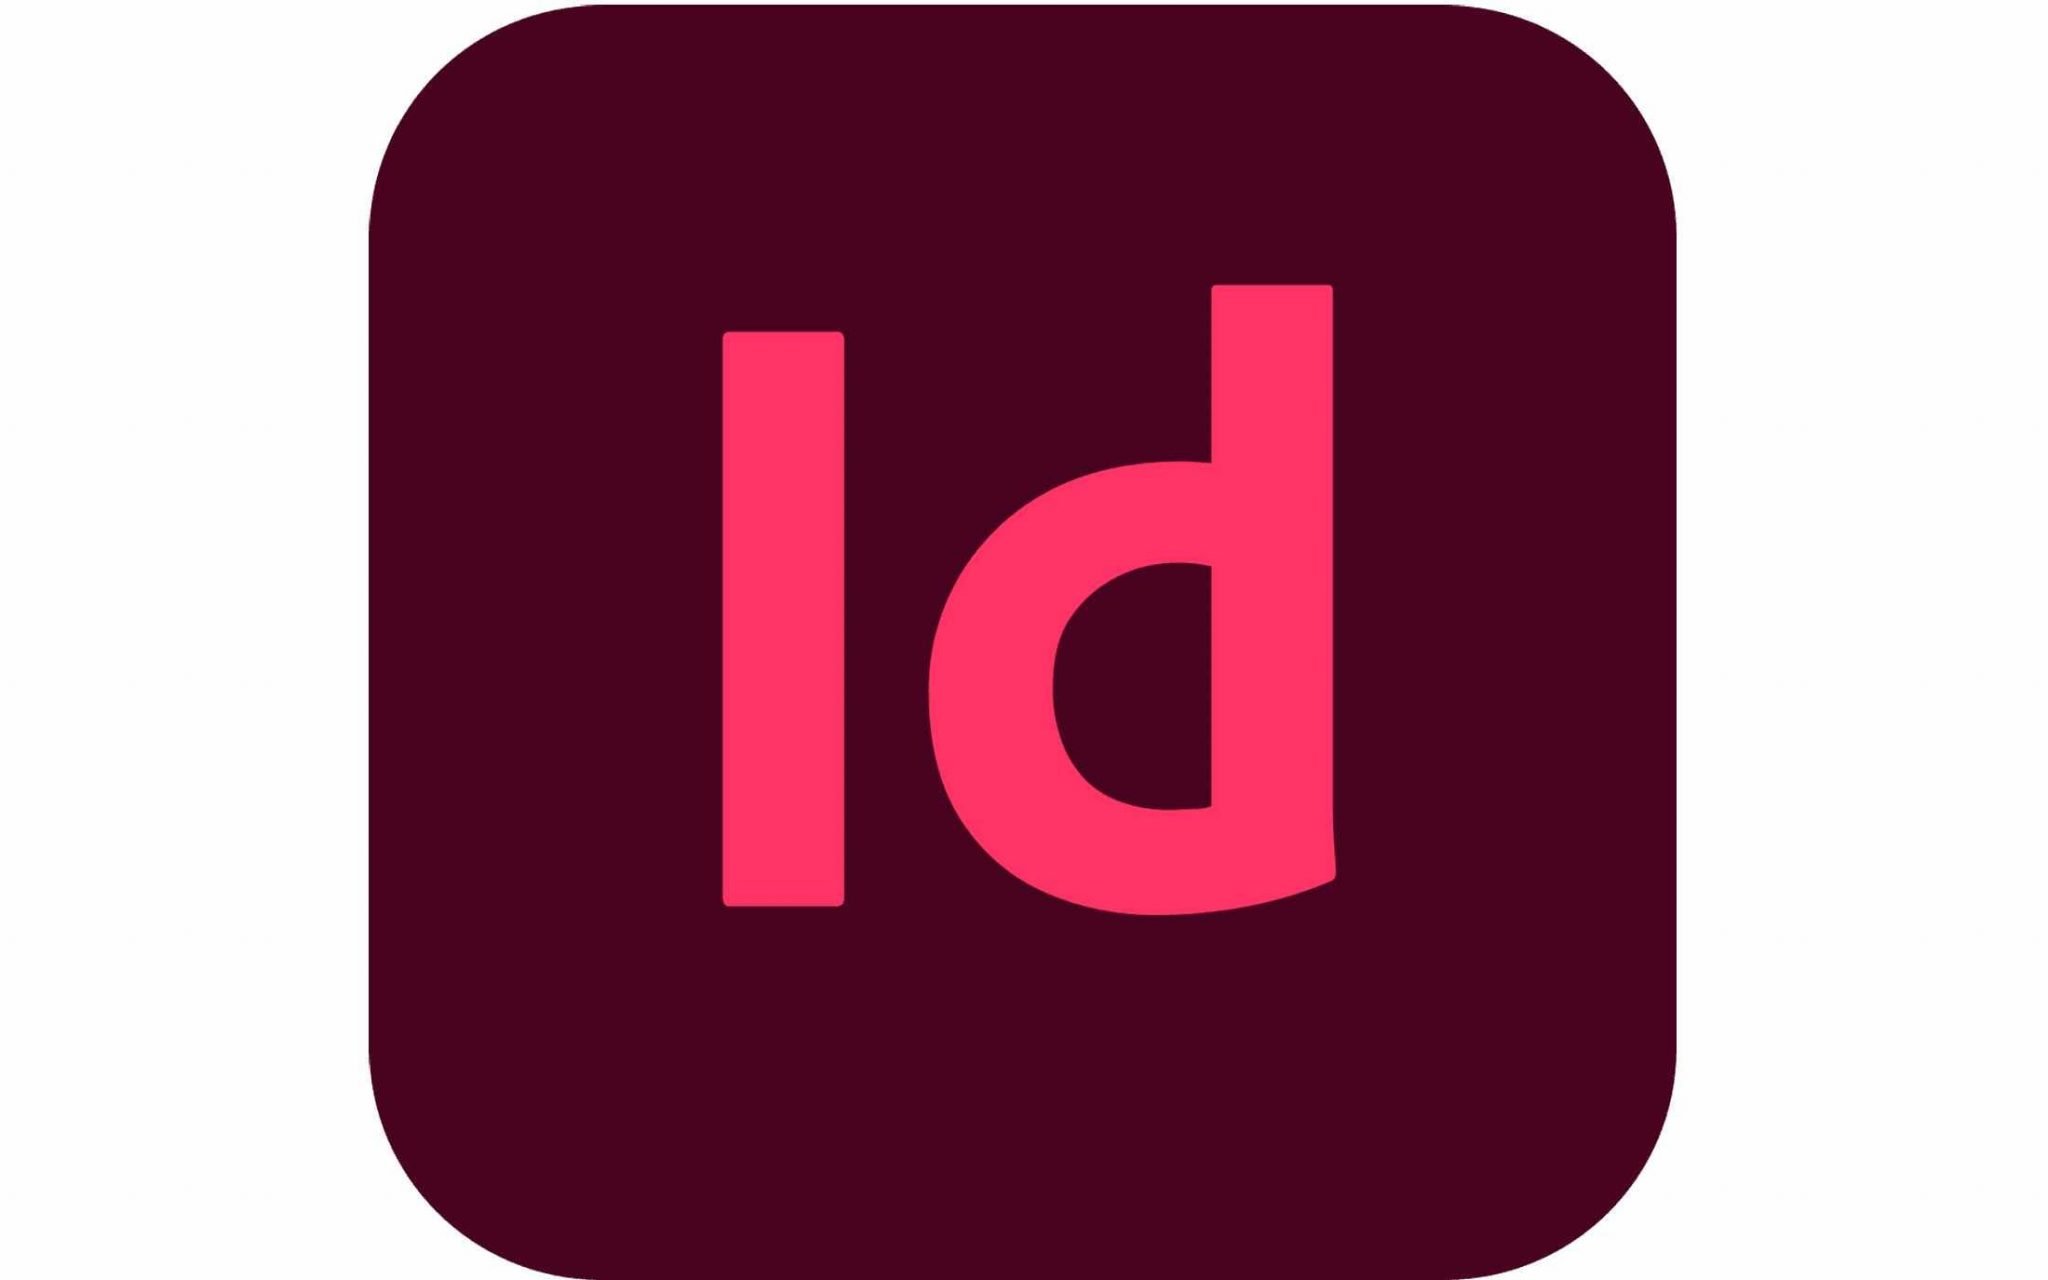 Adobe indesign install - cclastouch